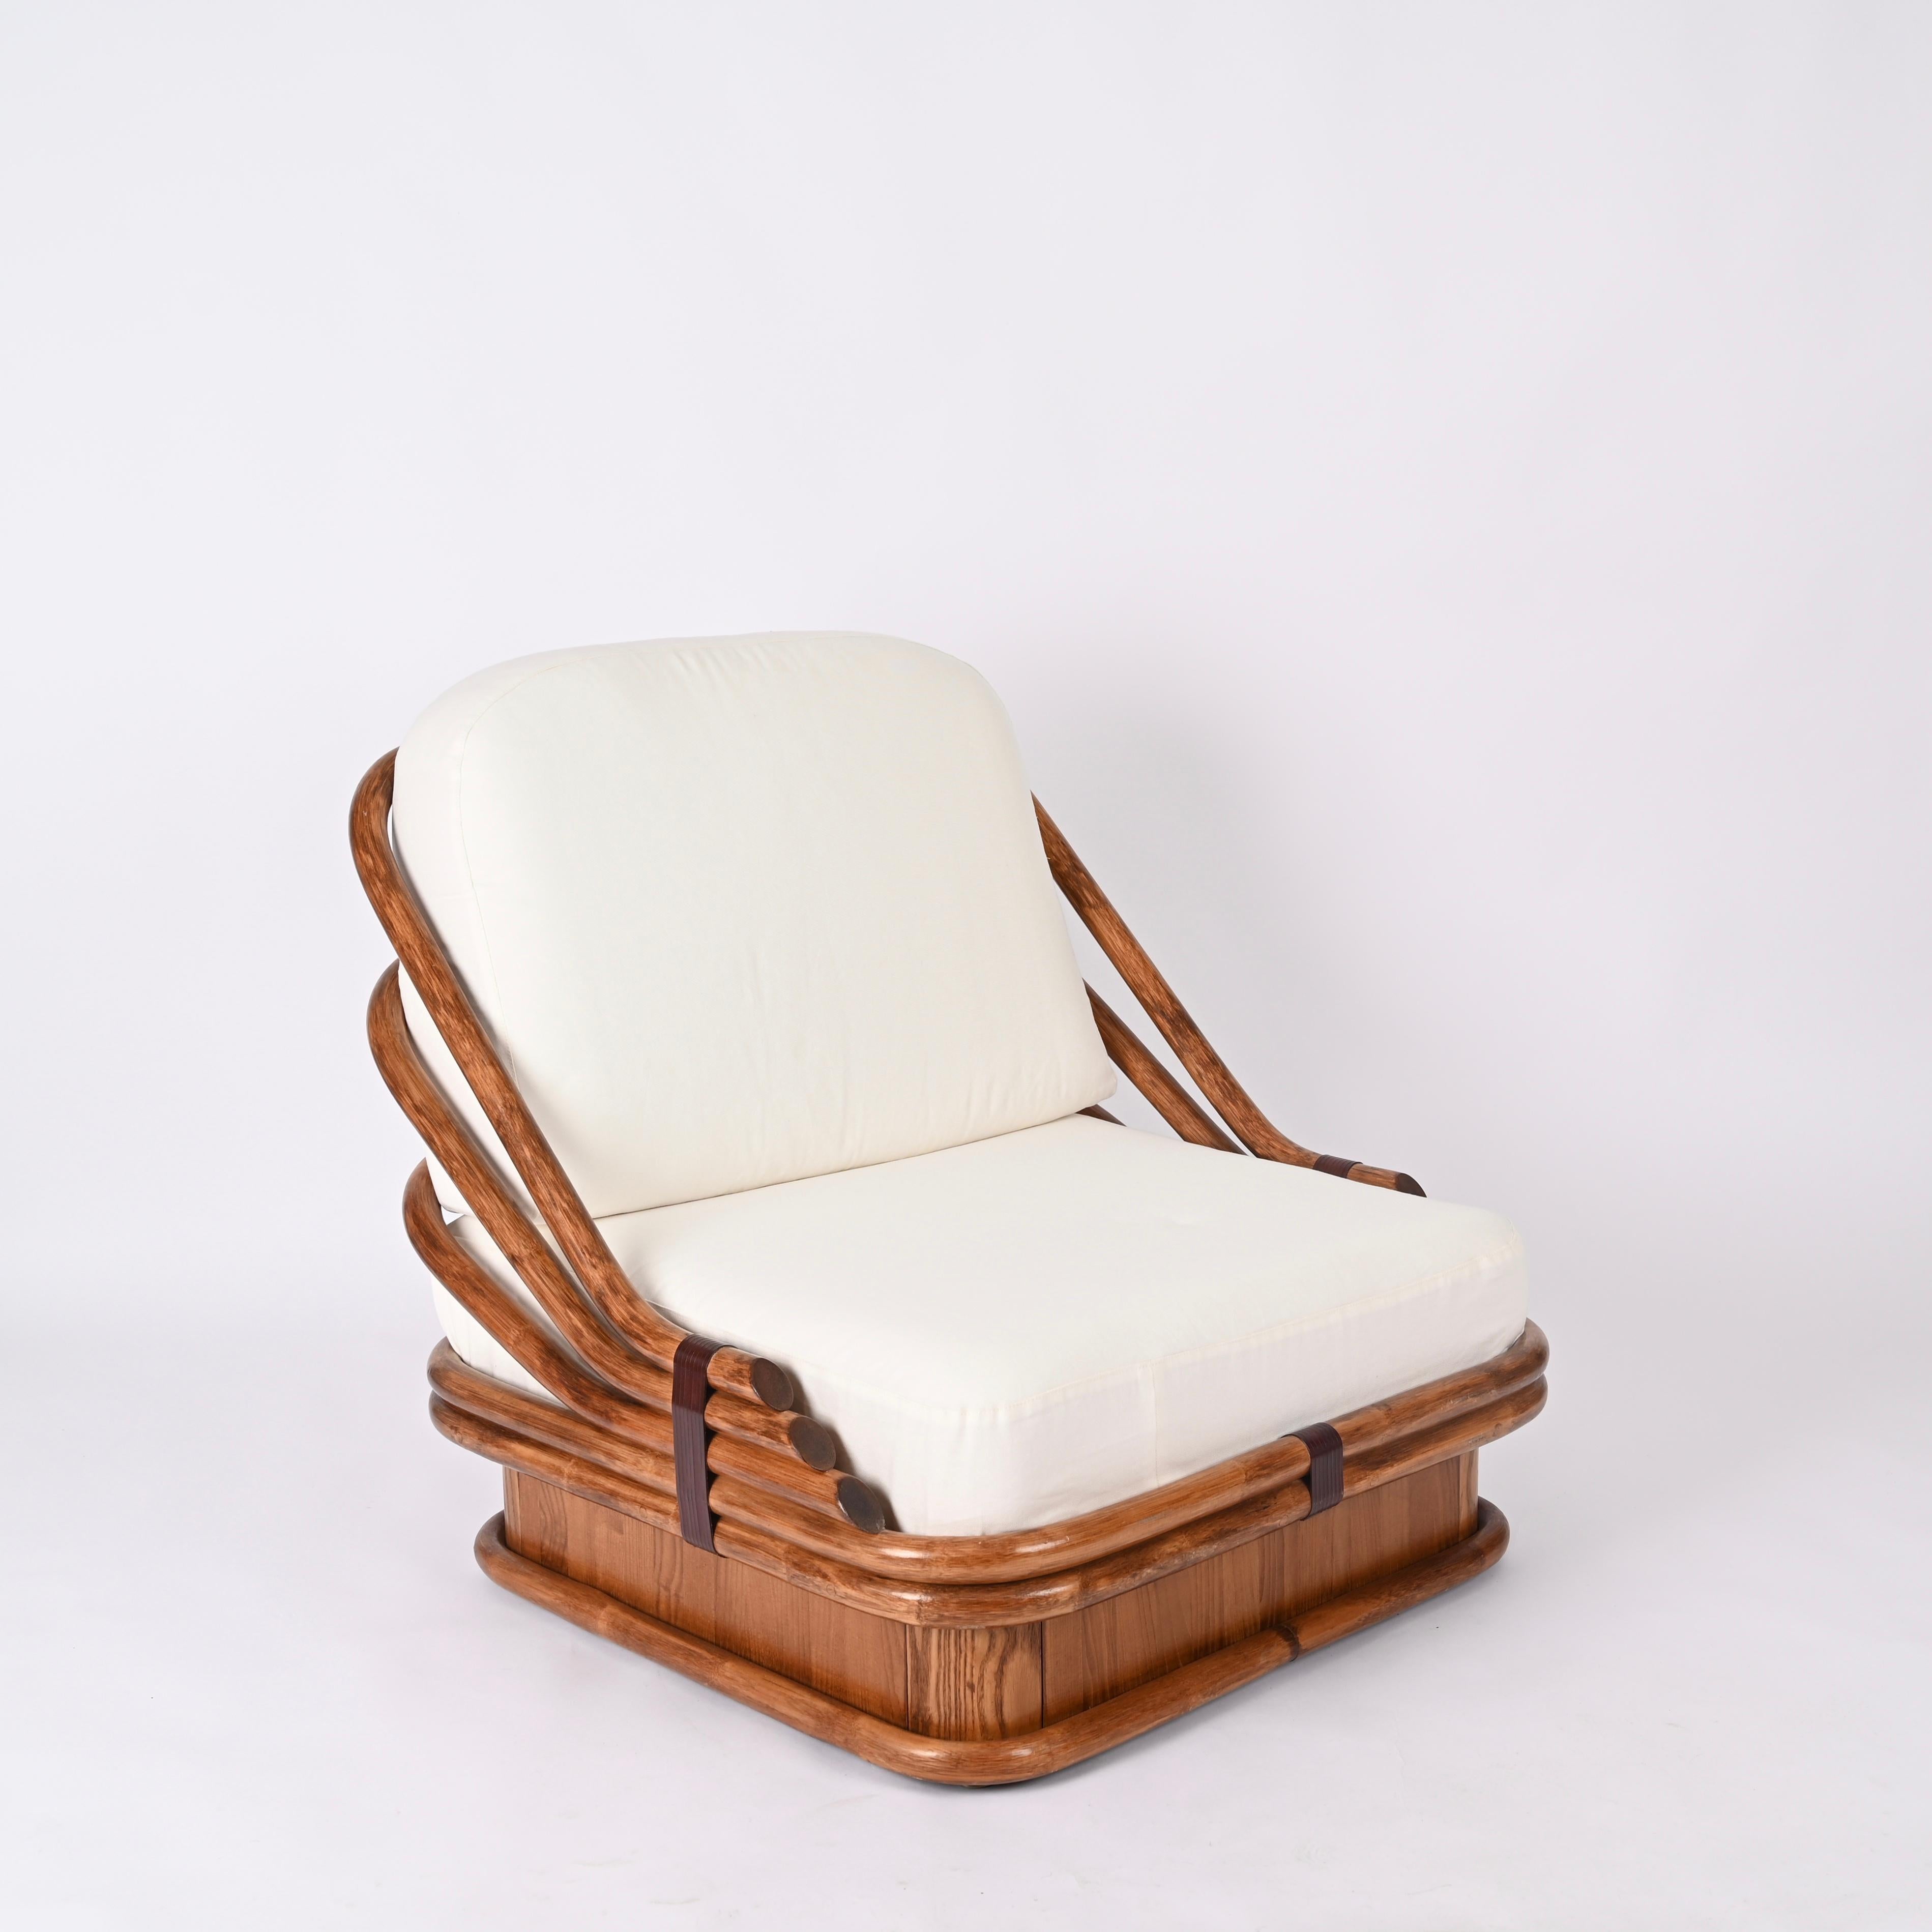 Italian Mid-Century Curved Bamboo and Leather Armchair, White Fabric, Italy 1960s For Sale